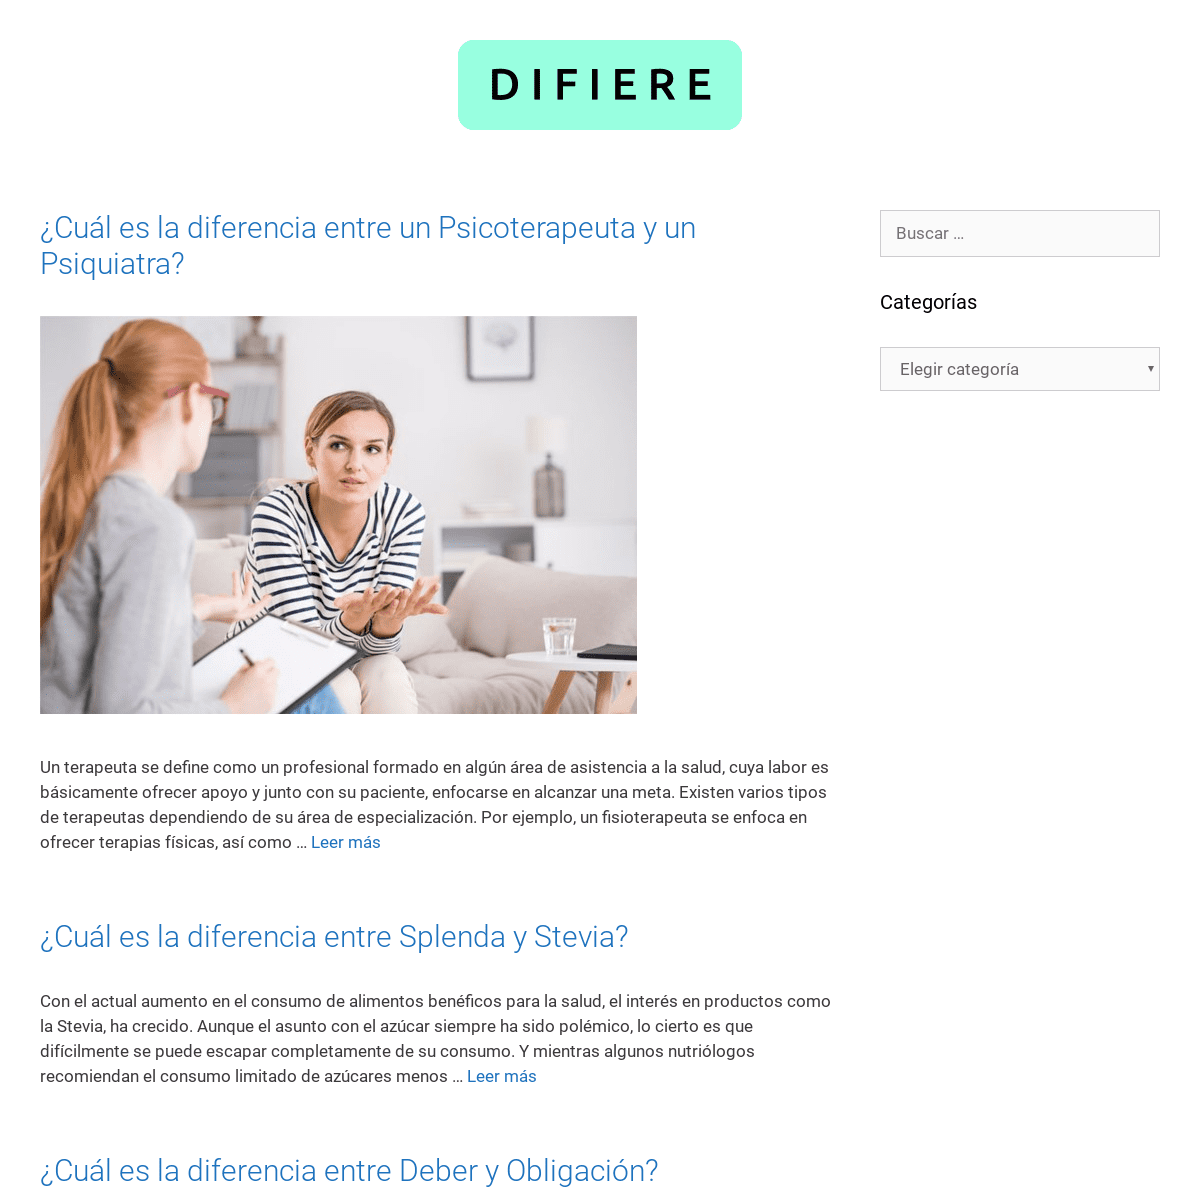 A complete backup of difiere.com